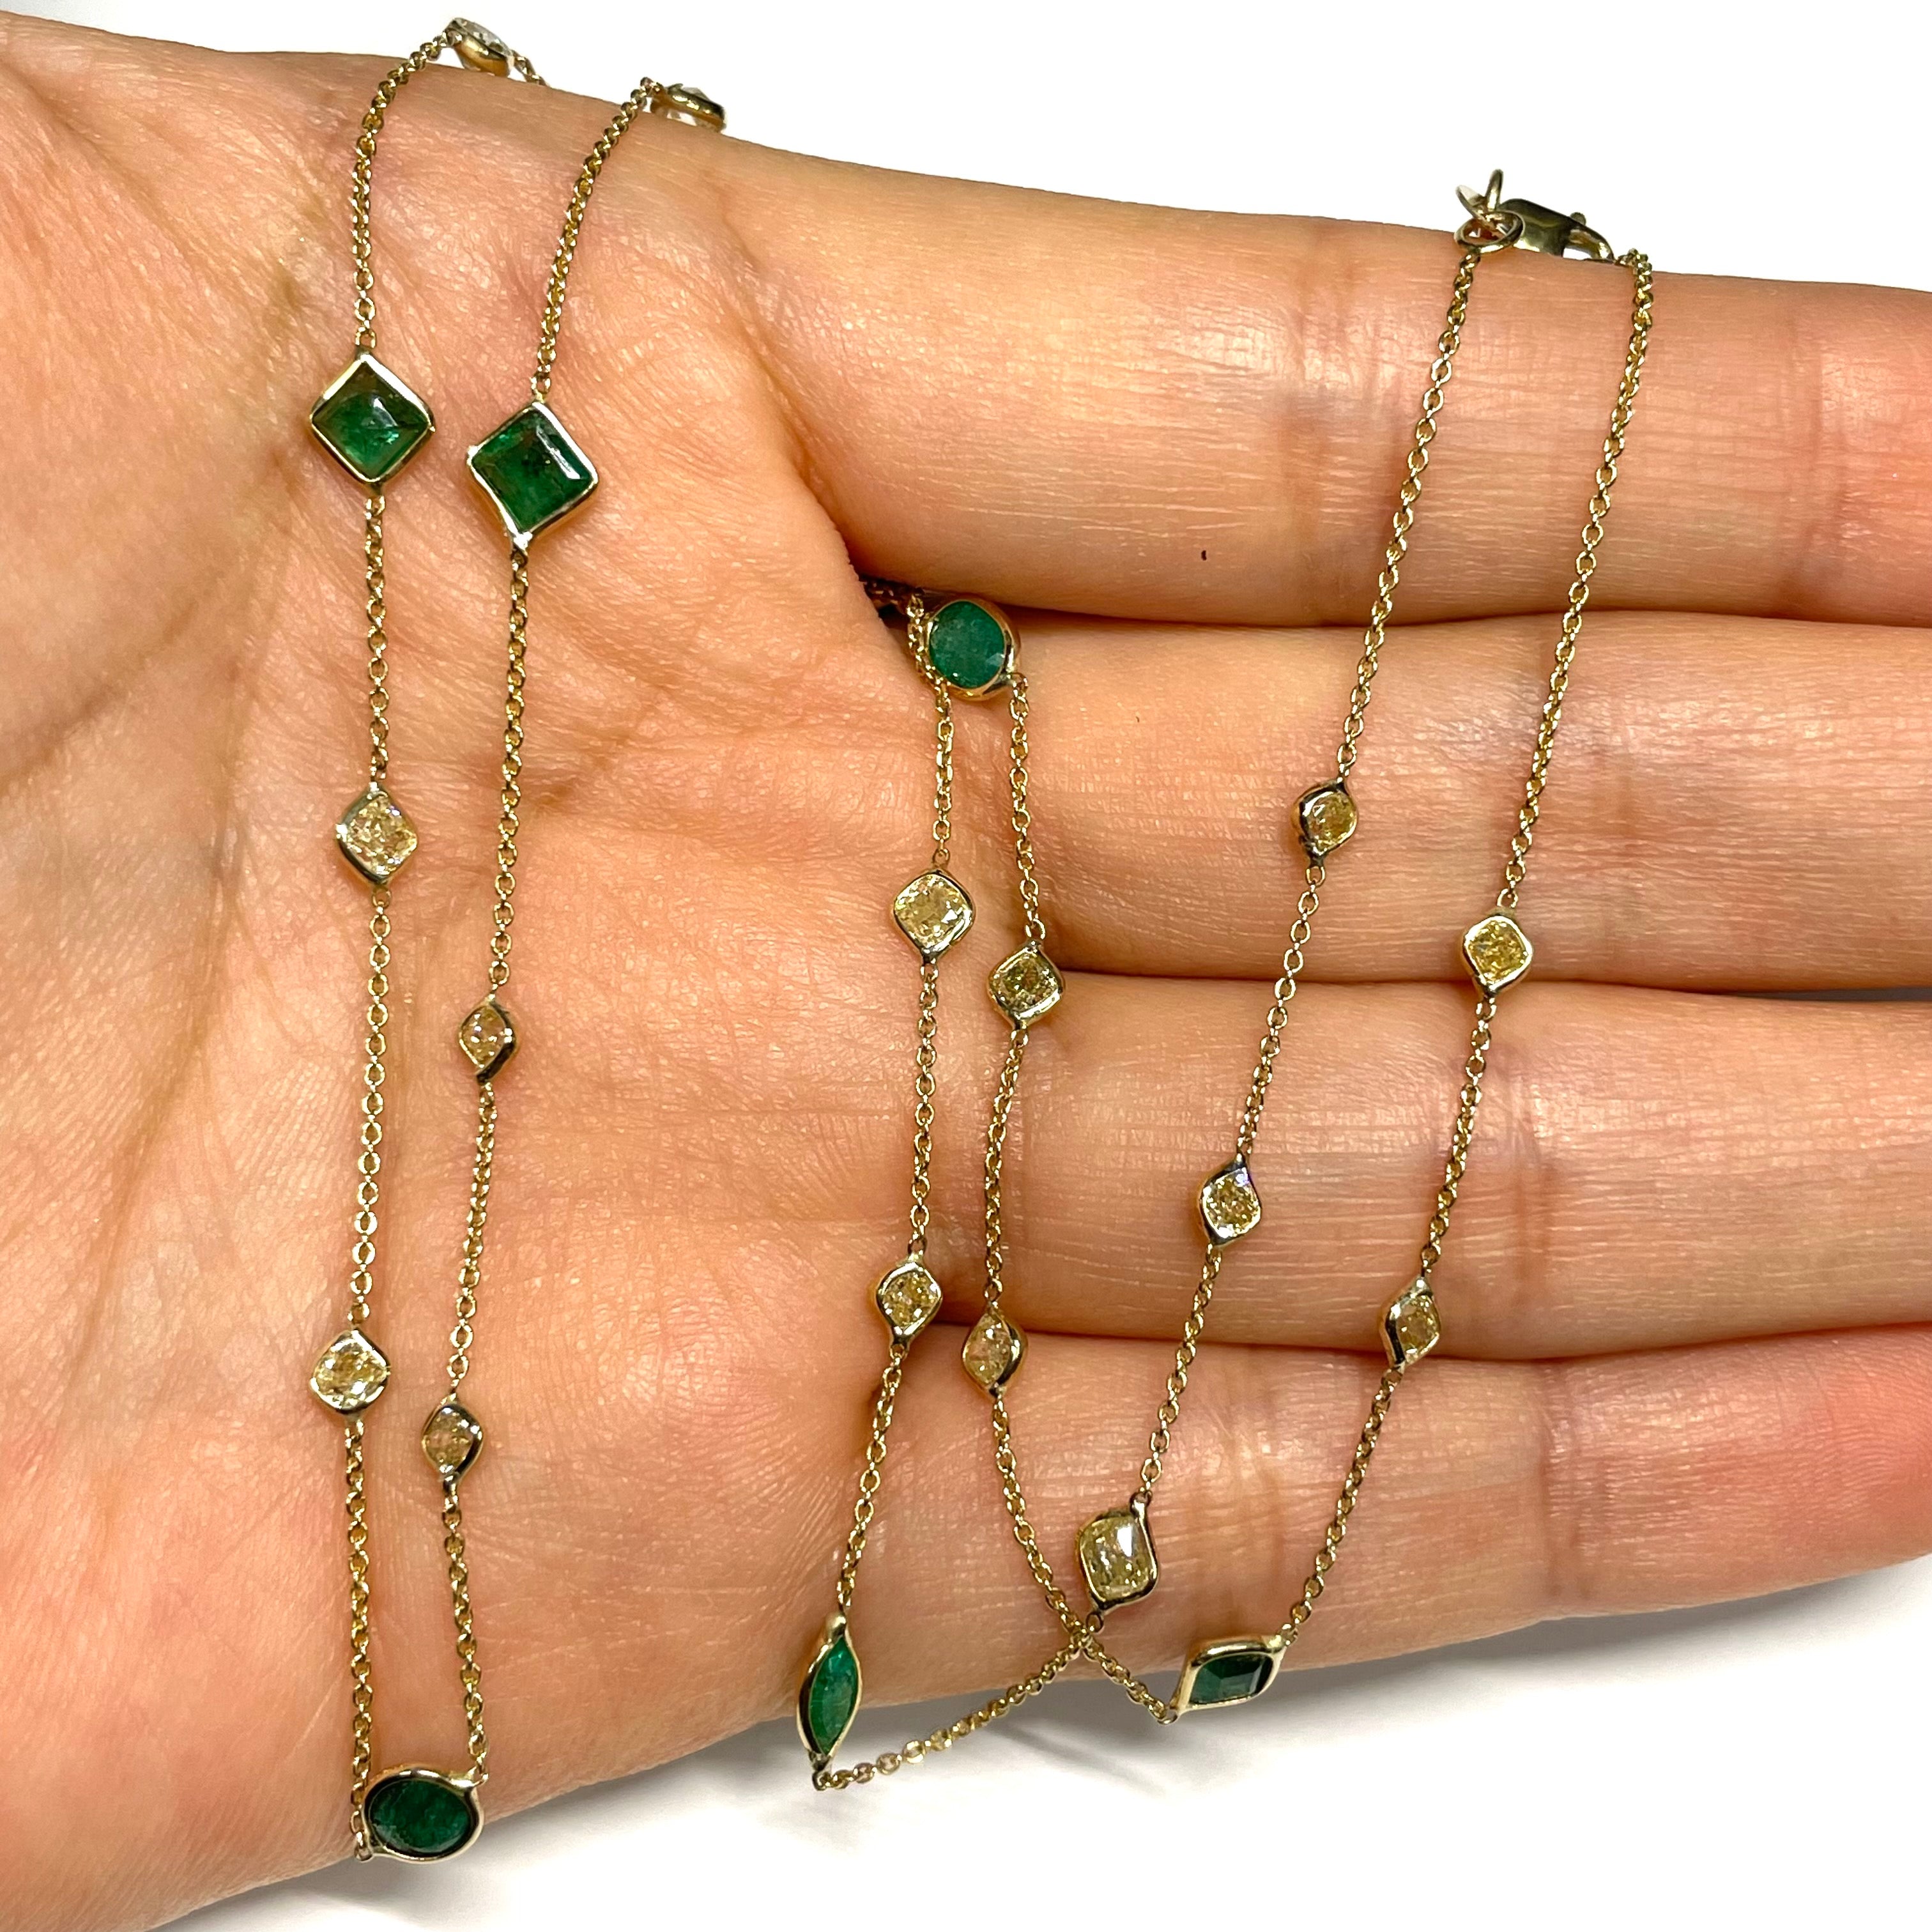 Emerald Diamond Necklace By The Yard in Solid 14k Yellow Gold